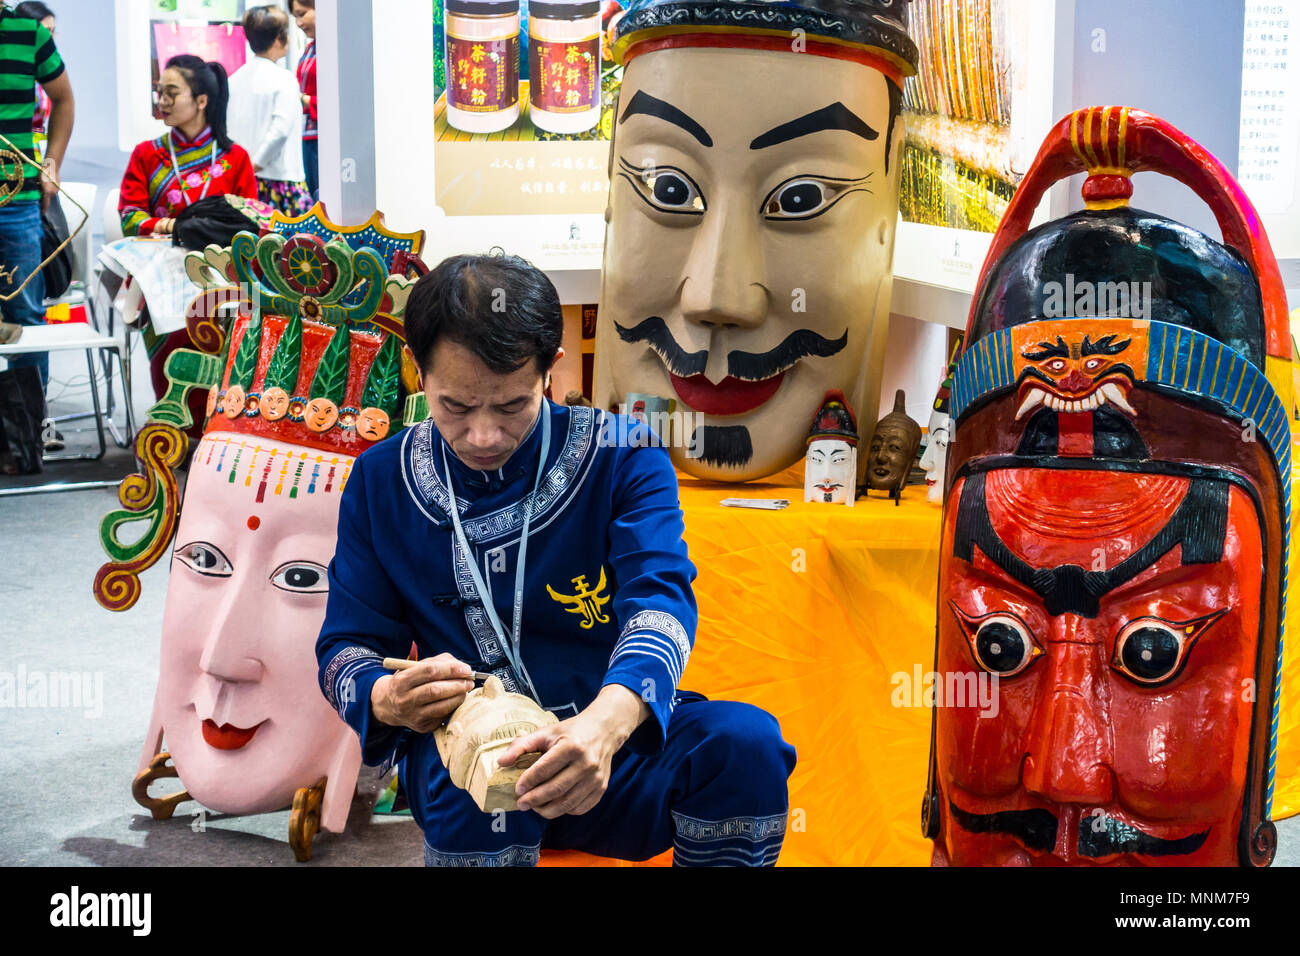 China artisan, craftsman, carving colorful wood Chinese masks of varying sizes at a culture fair in Shenzhen China Stock Photo